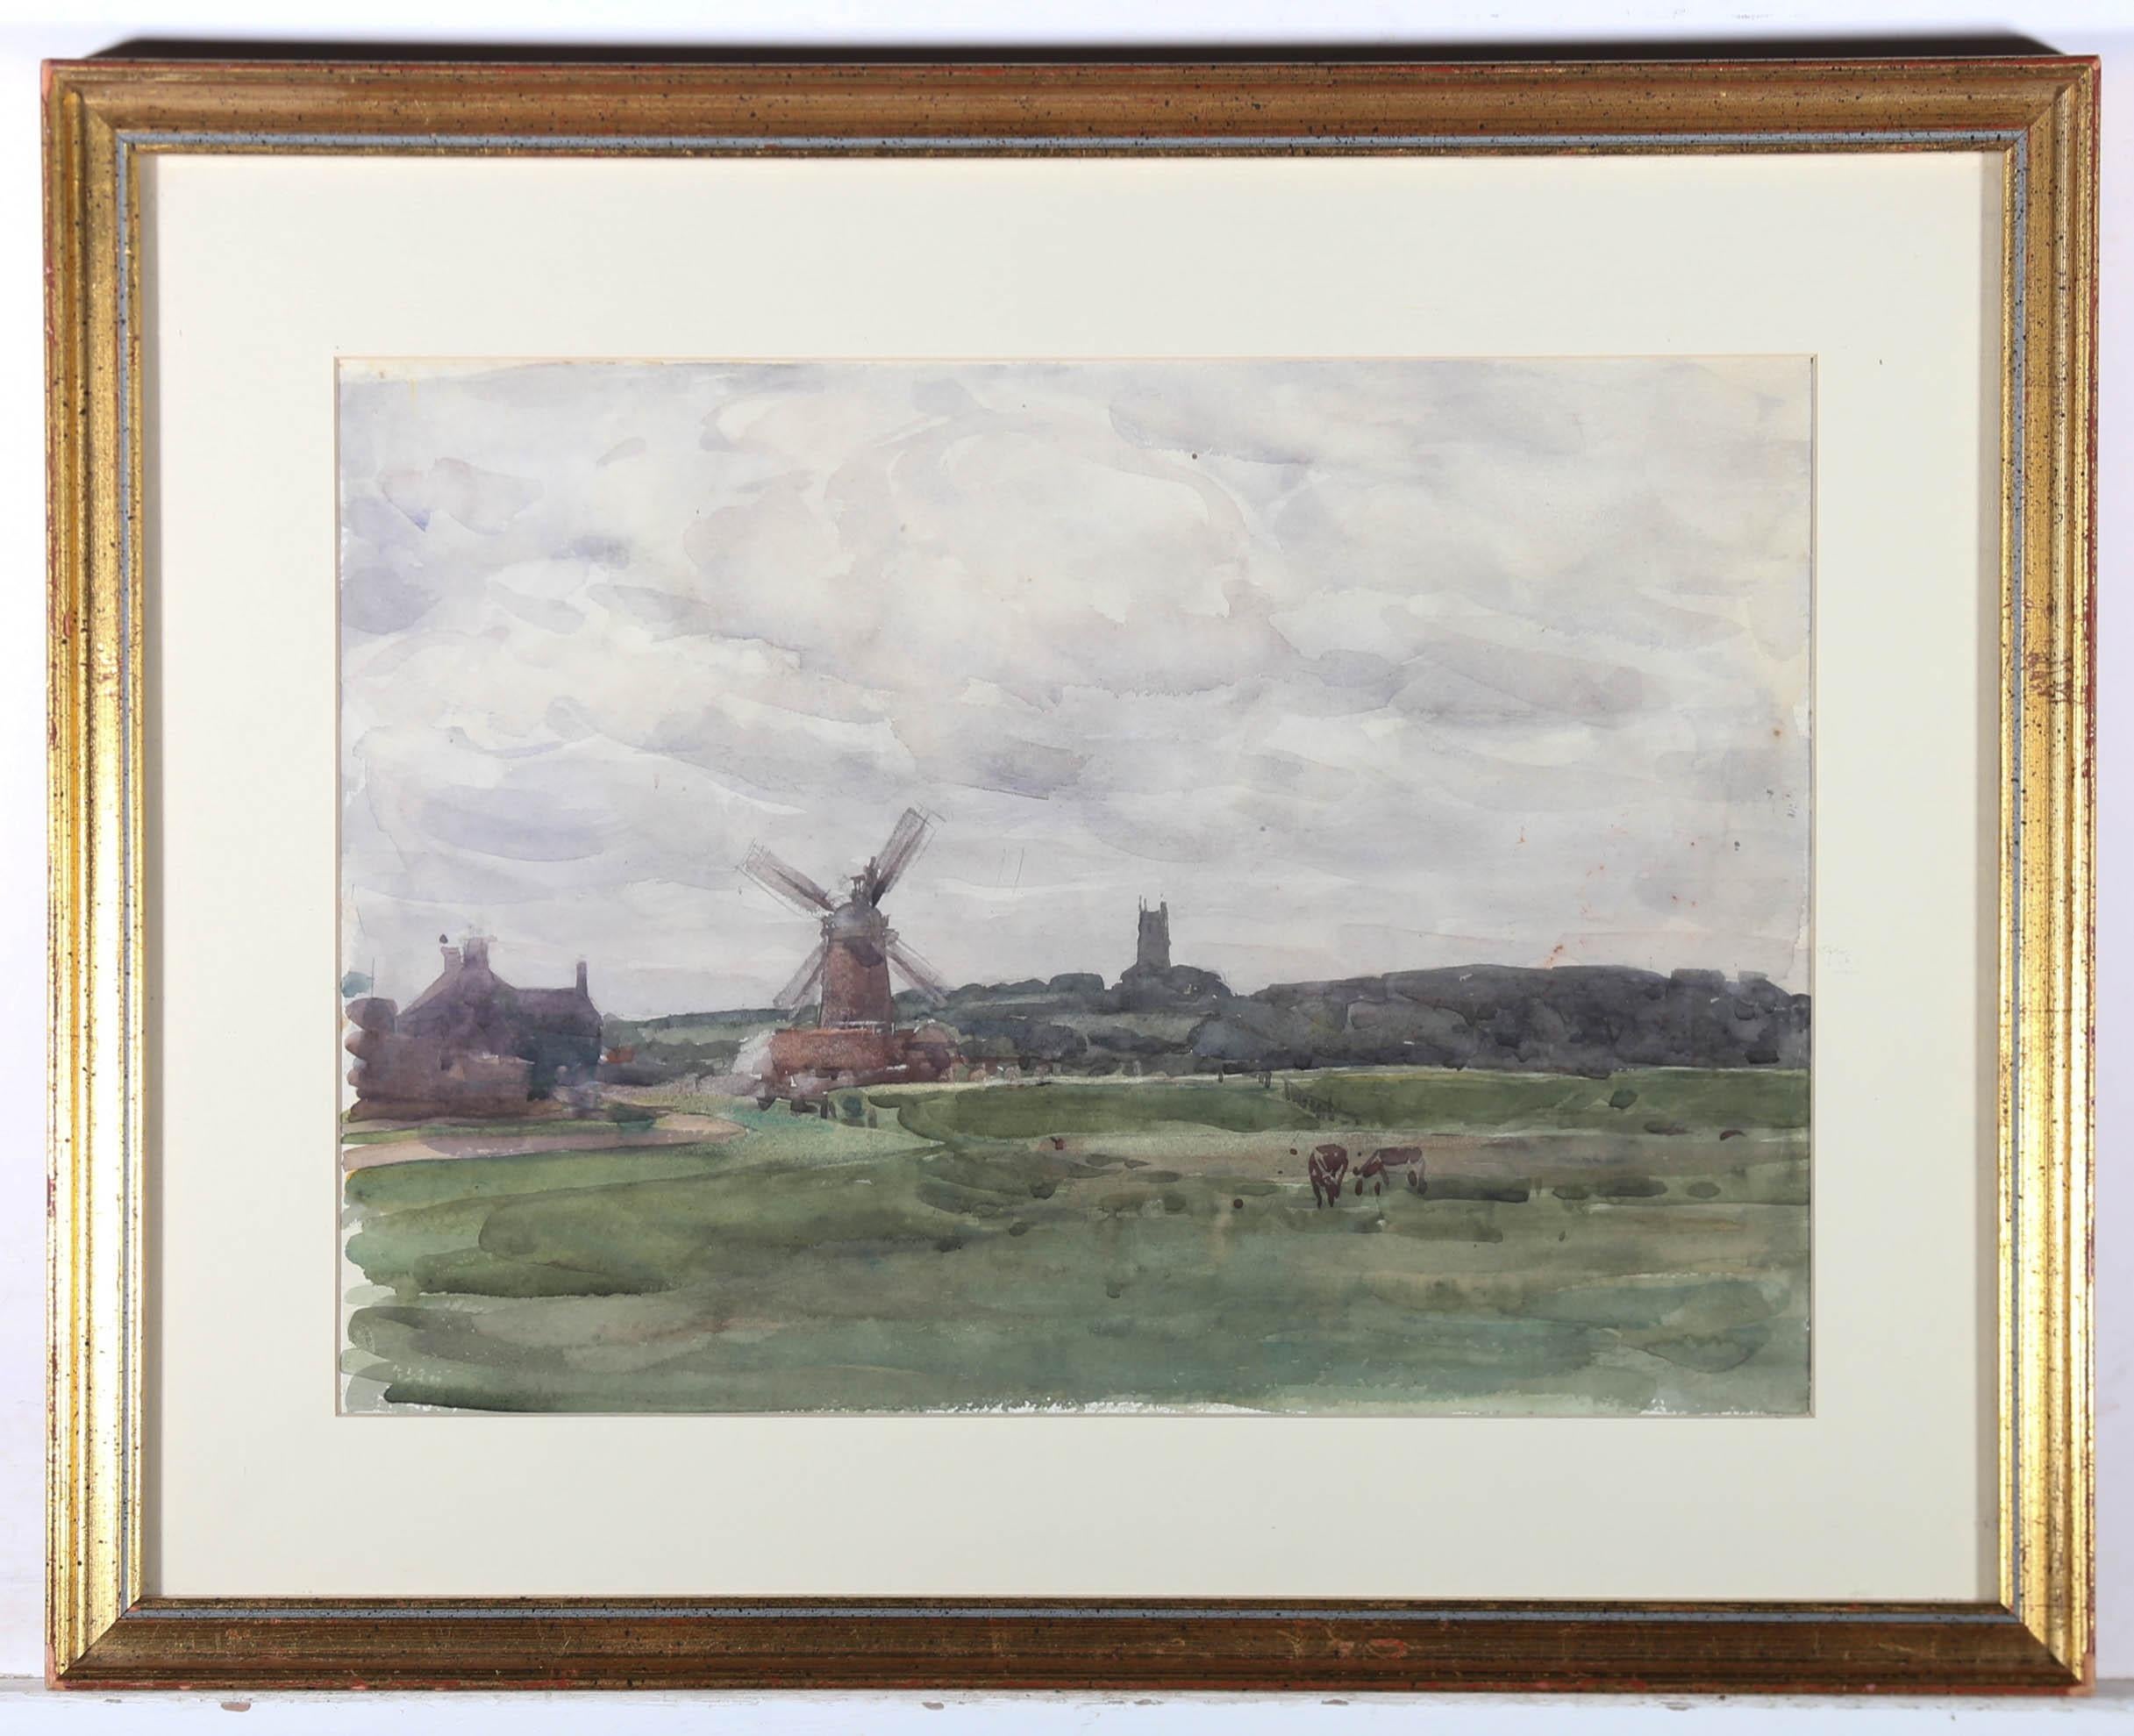 A fine early 20th century watercolour by Henry Charles Brewer RI (1866-1950), depicting a country landscape with spinning windmill and church tower. Elegantly mounted in a gilt-effect frame. On watercolour paper. 